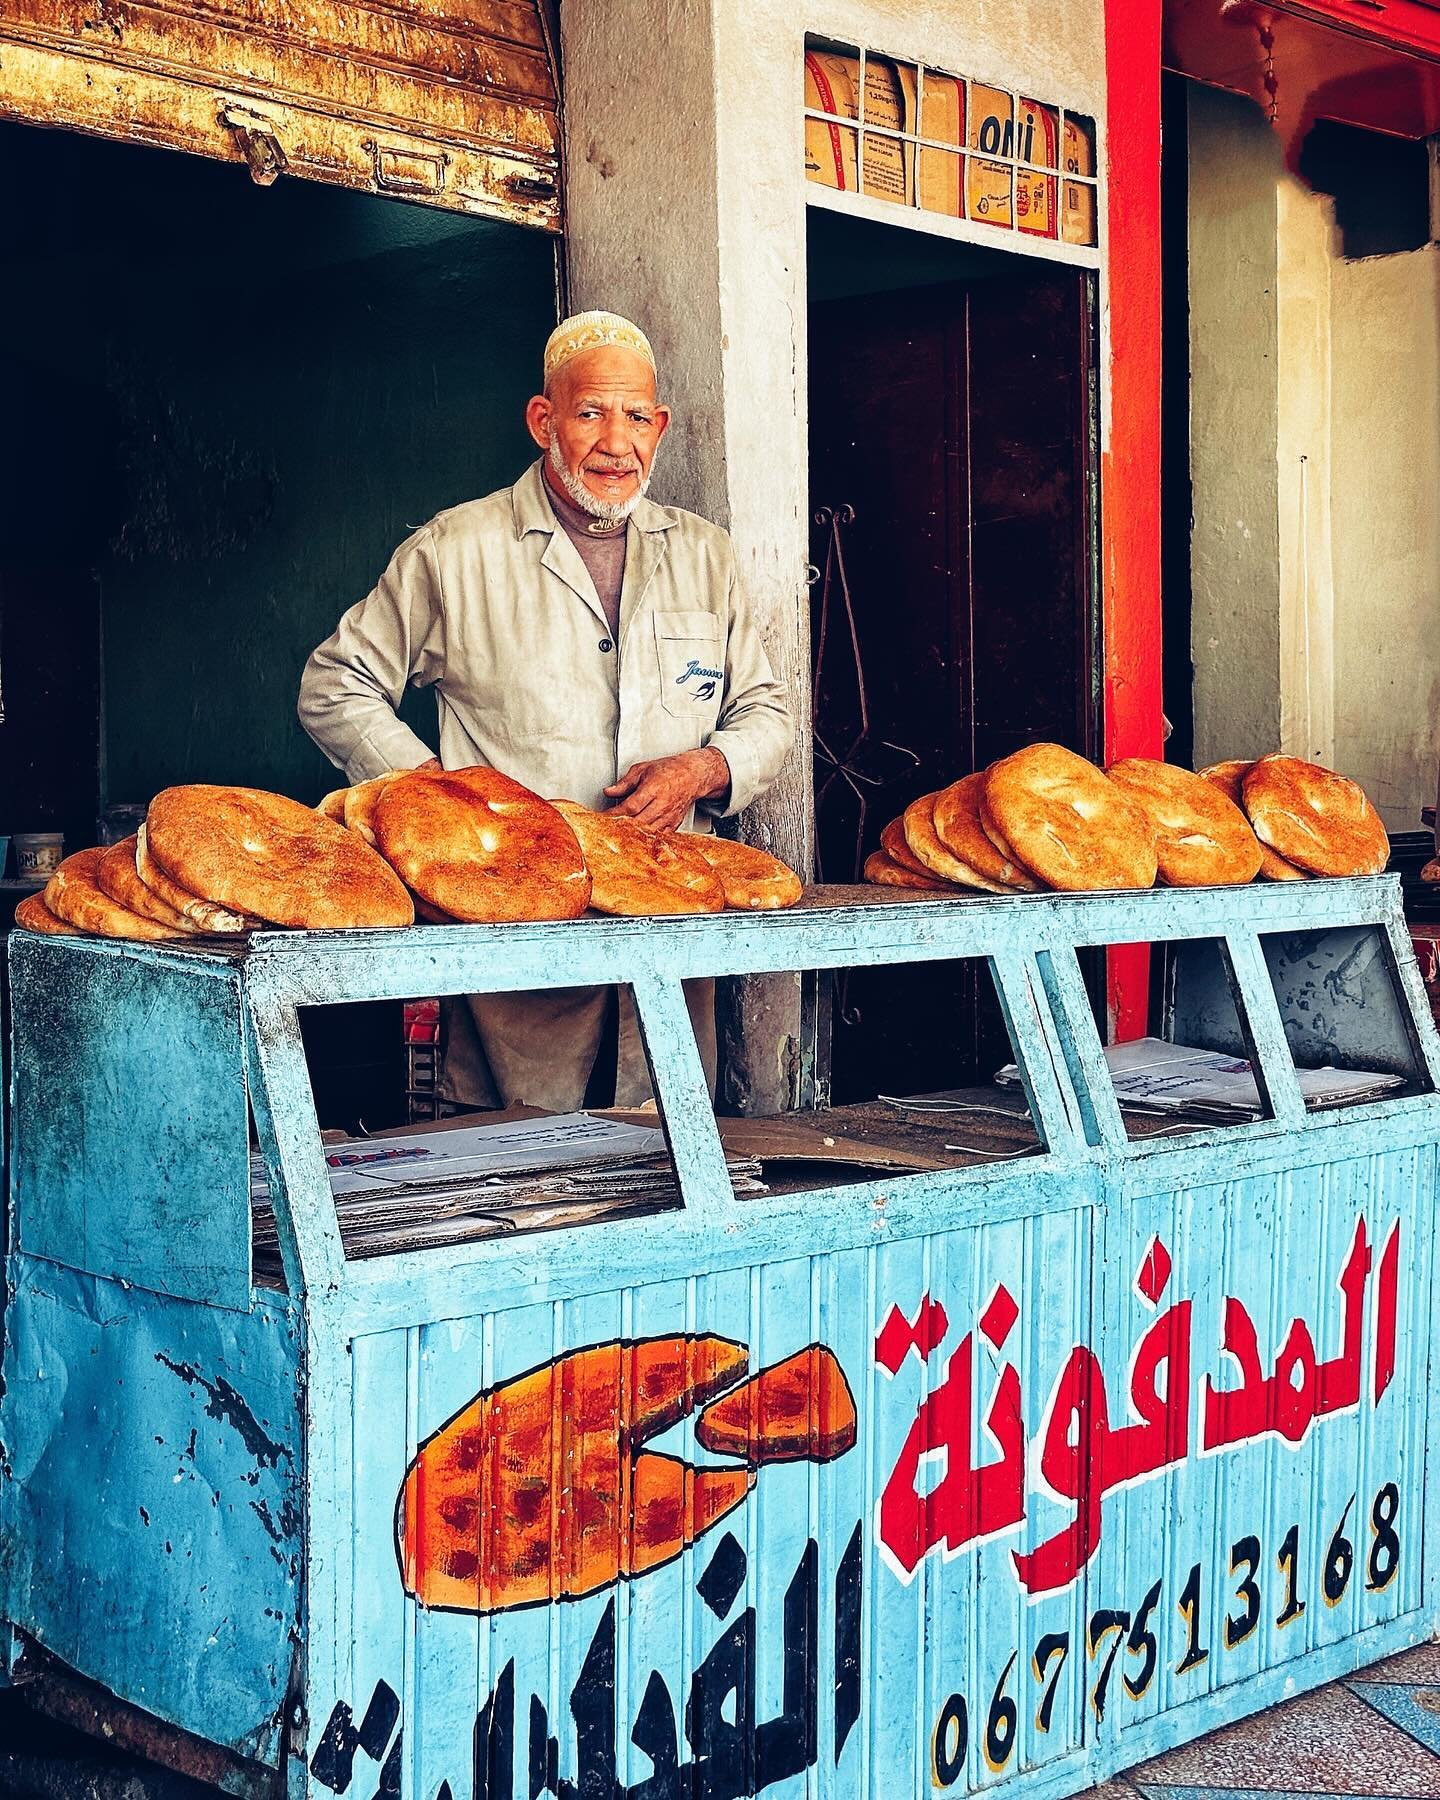 He makes the best bread in the area. Confirmed by a group of 8 American women. 
.
.
.
,
.
#travelphotography #travelcommunity #iphonephotography #iphoneonly #iphoneography #nationalgeographic #afar